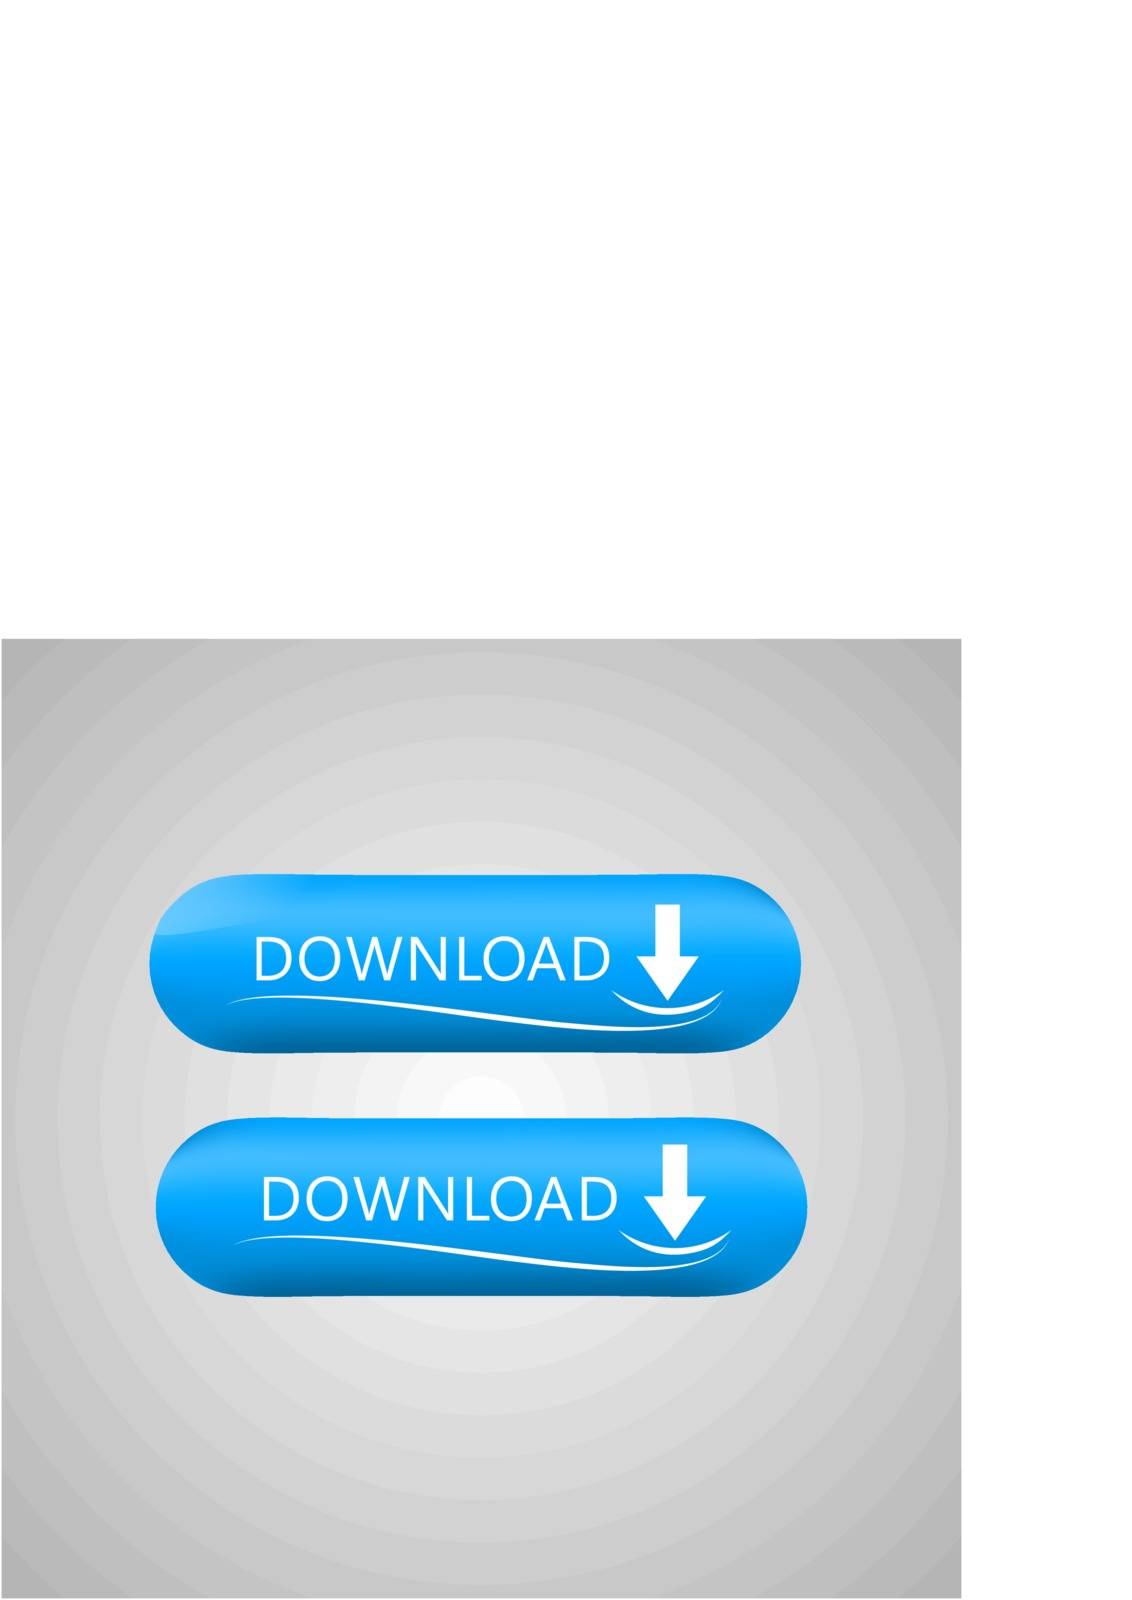 Illustration of a blue download button.